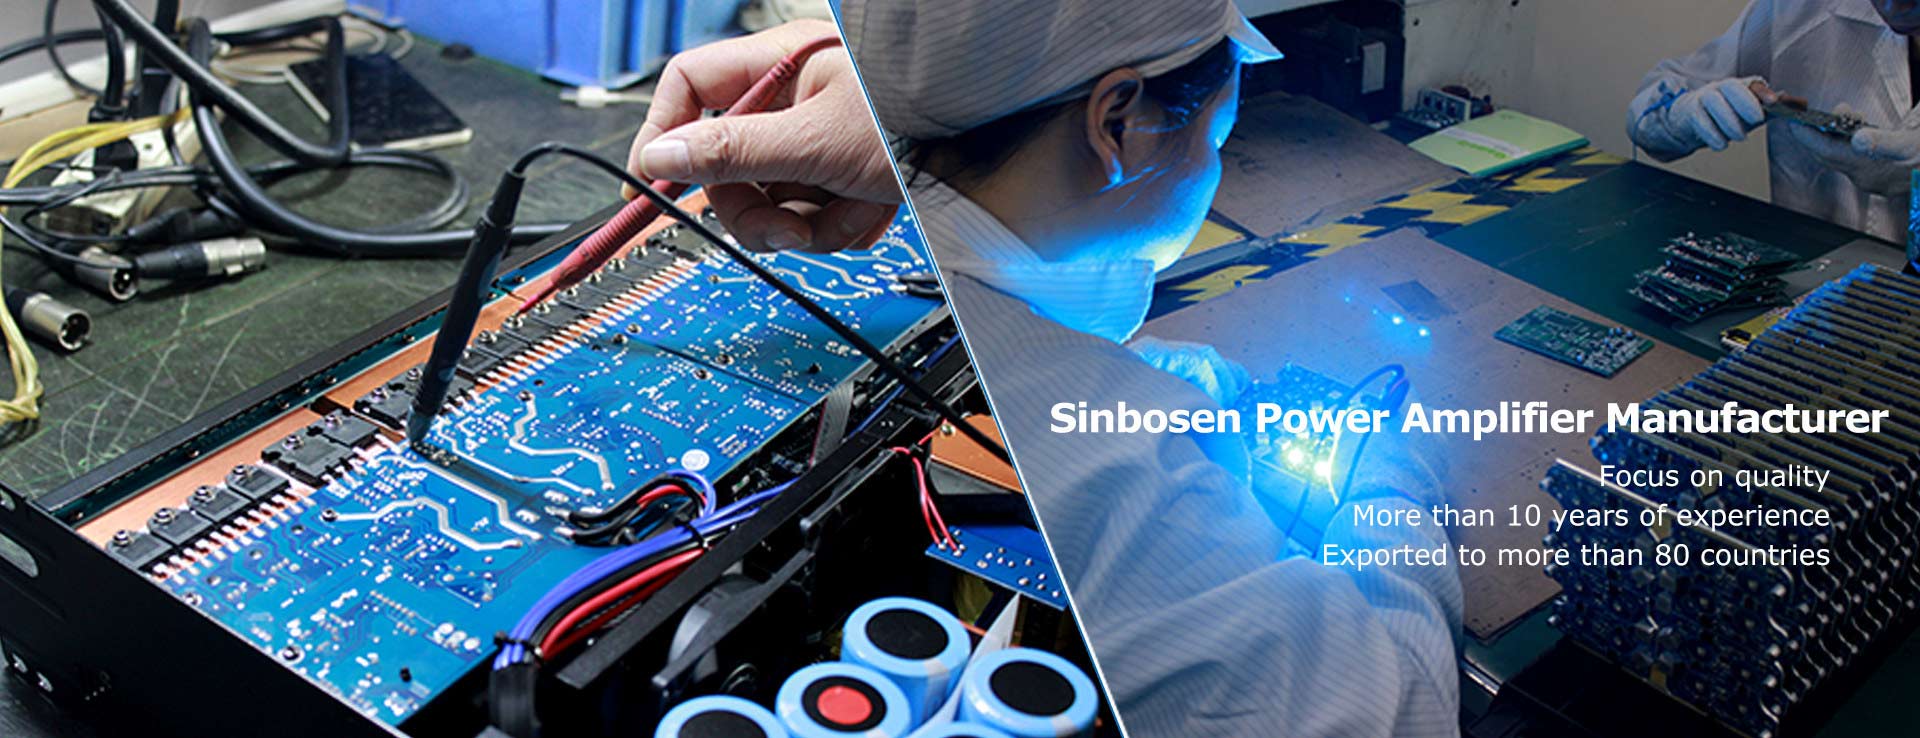 Sinbosen Audio Amplifier Manufacturer More than 10 years of experience